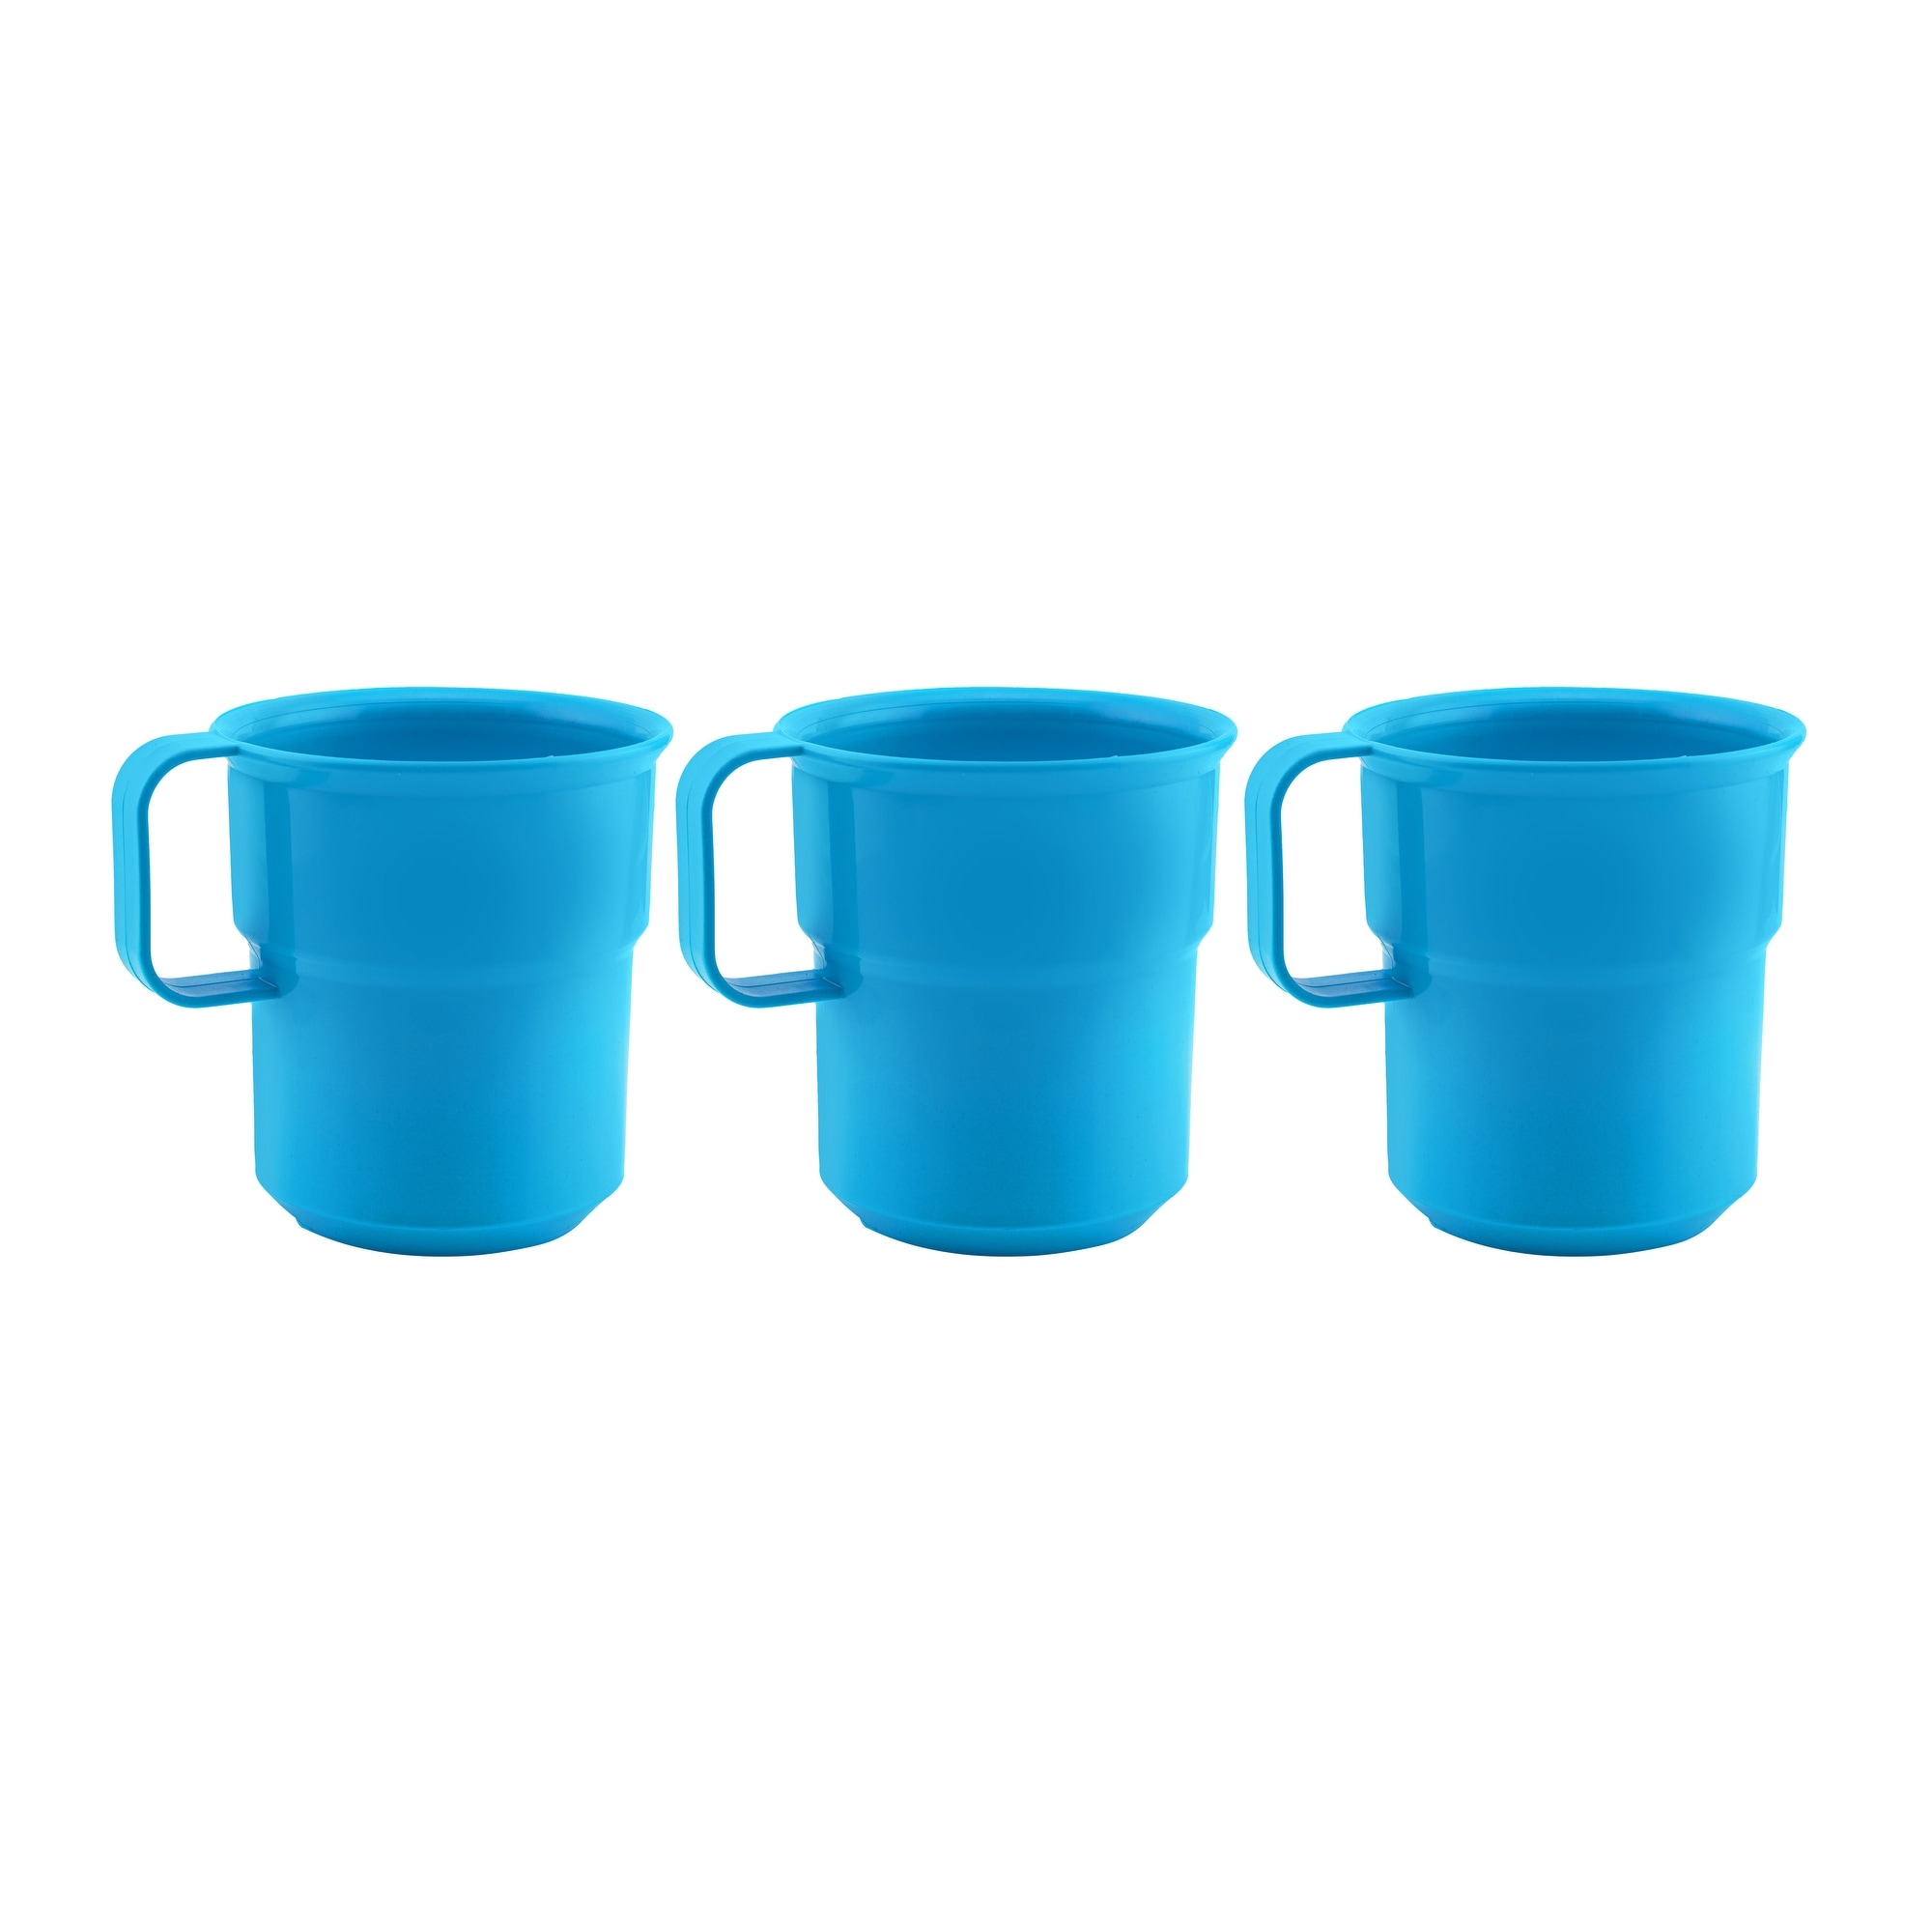 https://ak1.ostkcdn.com/images/products/is/images/direct/8f664a2e6069849393363d7a5605972fa015deca/Break-Resistant-Plastic-Cup-Mugs-for-Coffee%2C-Juice---8oz-Pack-of-3.jpg